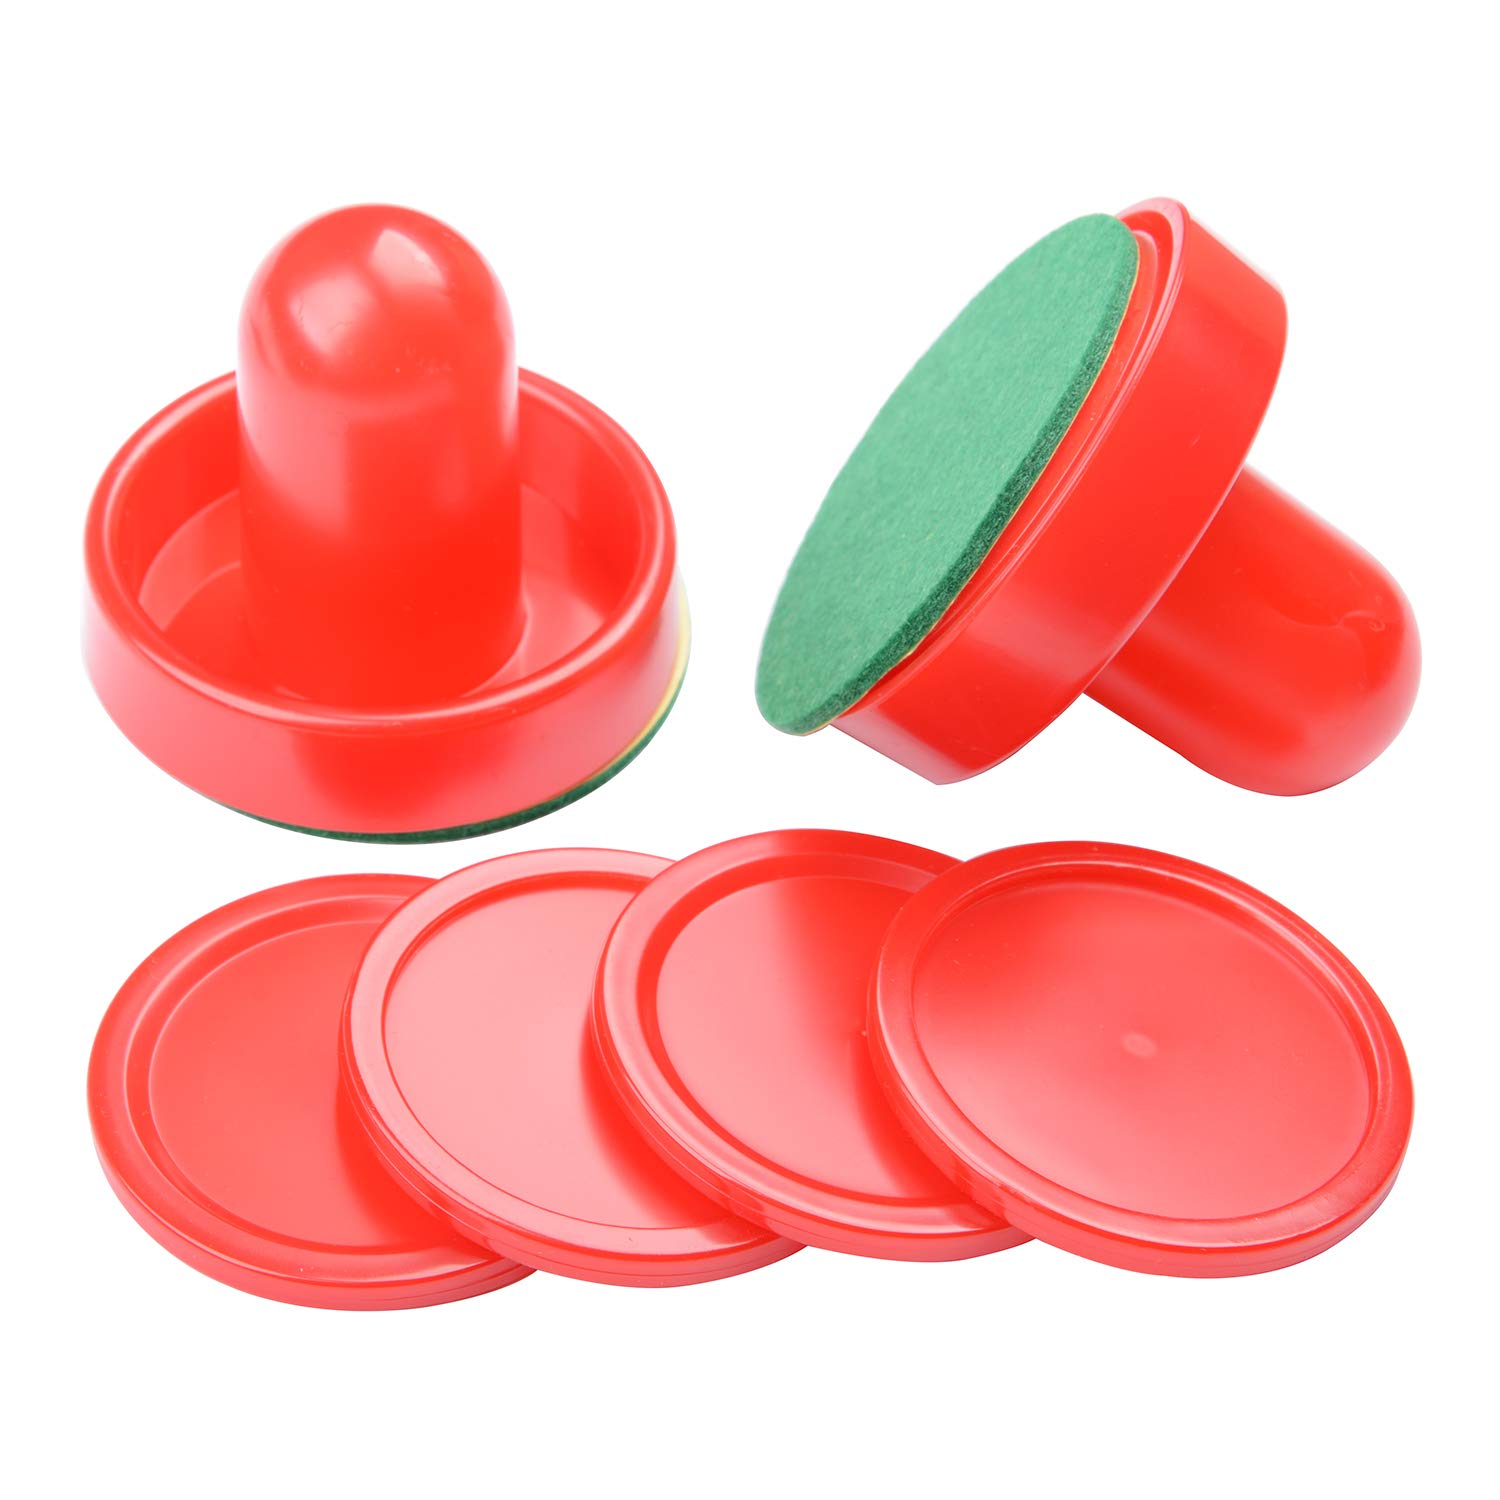 MUZOCT Great Goal Pushers Replacement Accessories for Game Tables - 2 Red Air Hockey Pushers and 4 Red Pucks for Children Mini